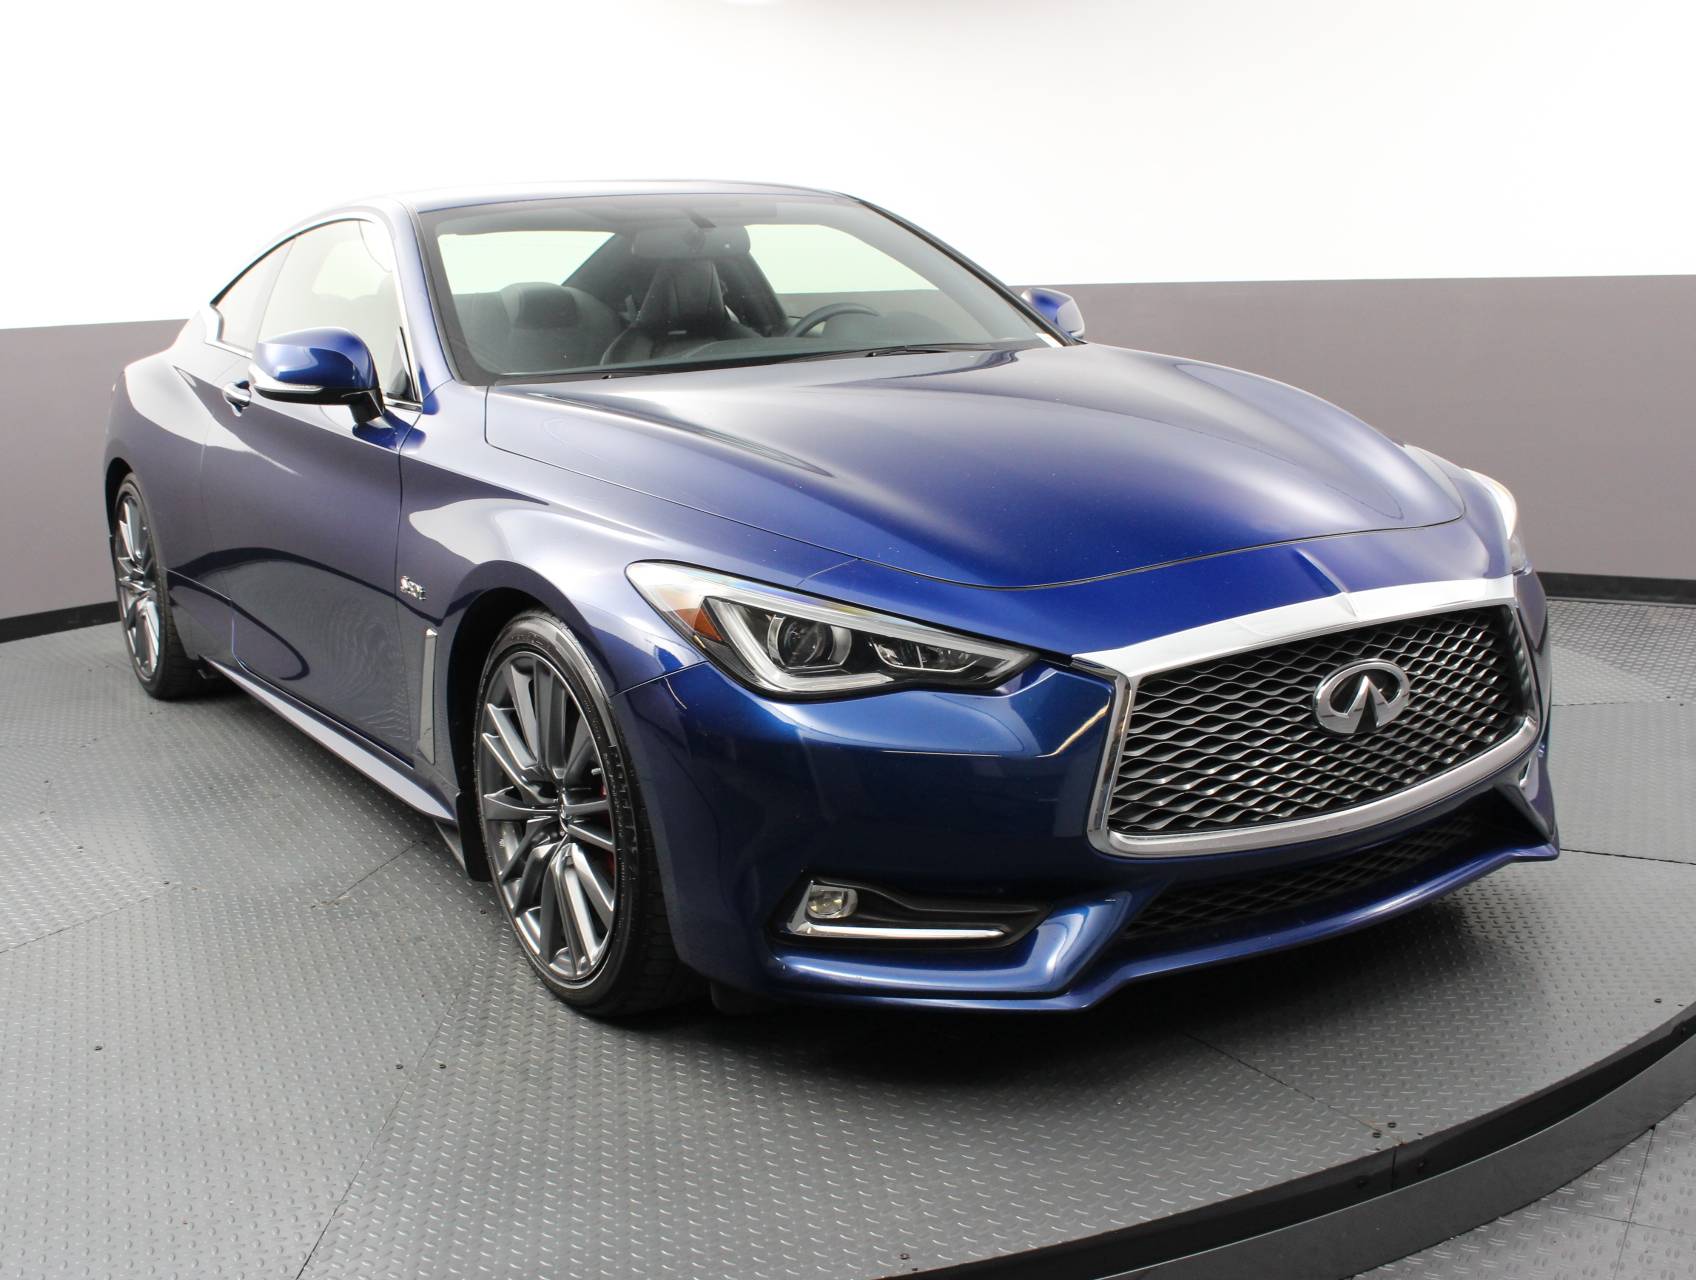 Florida Fine Cars - Used INFINITI Q60 2017 WEST PALM RED SPORT 400